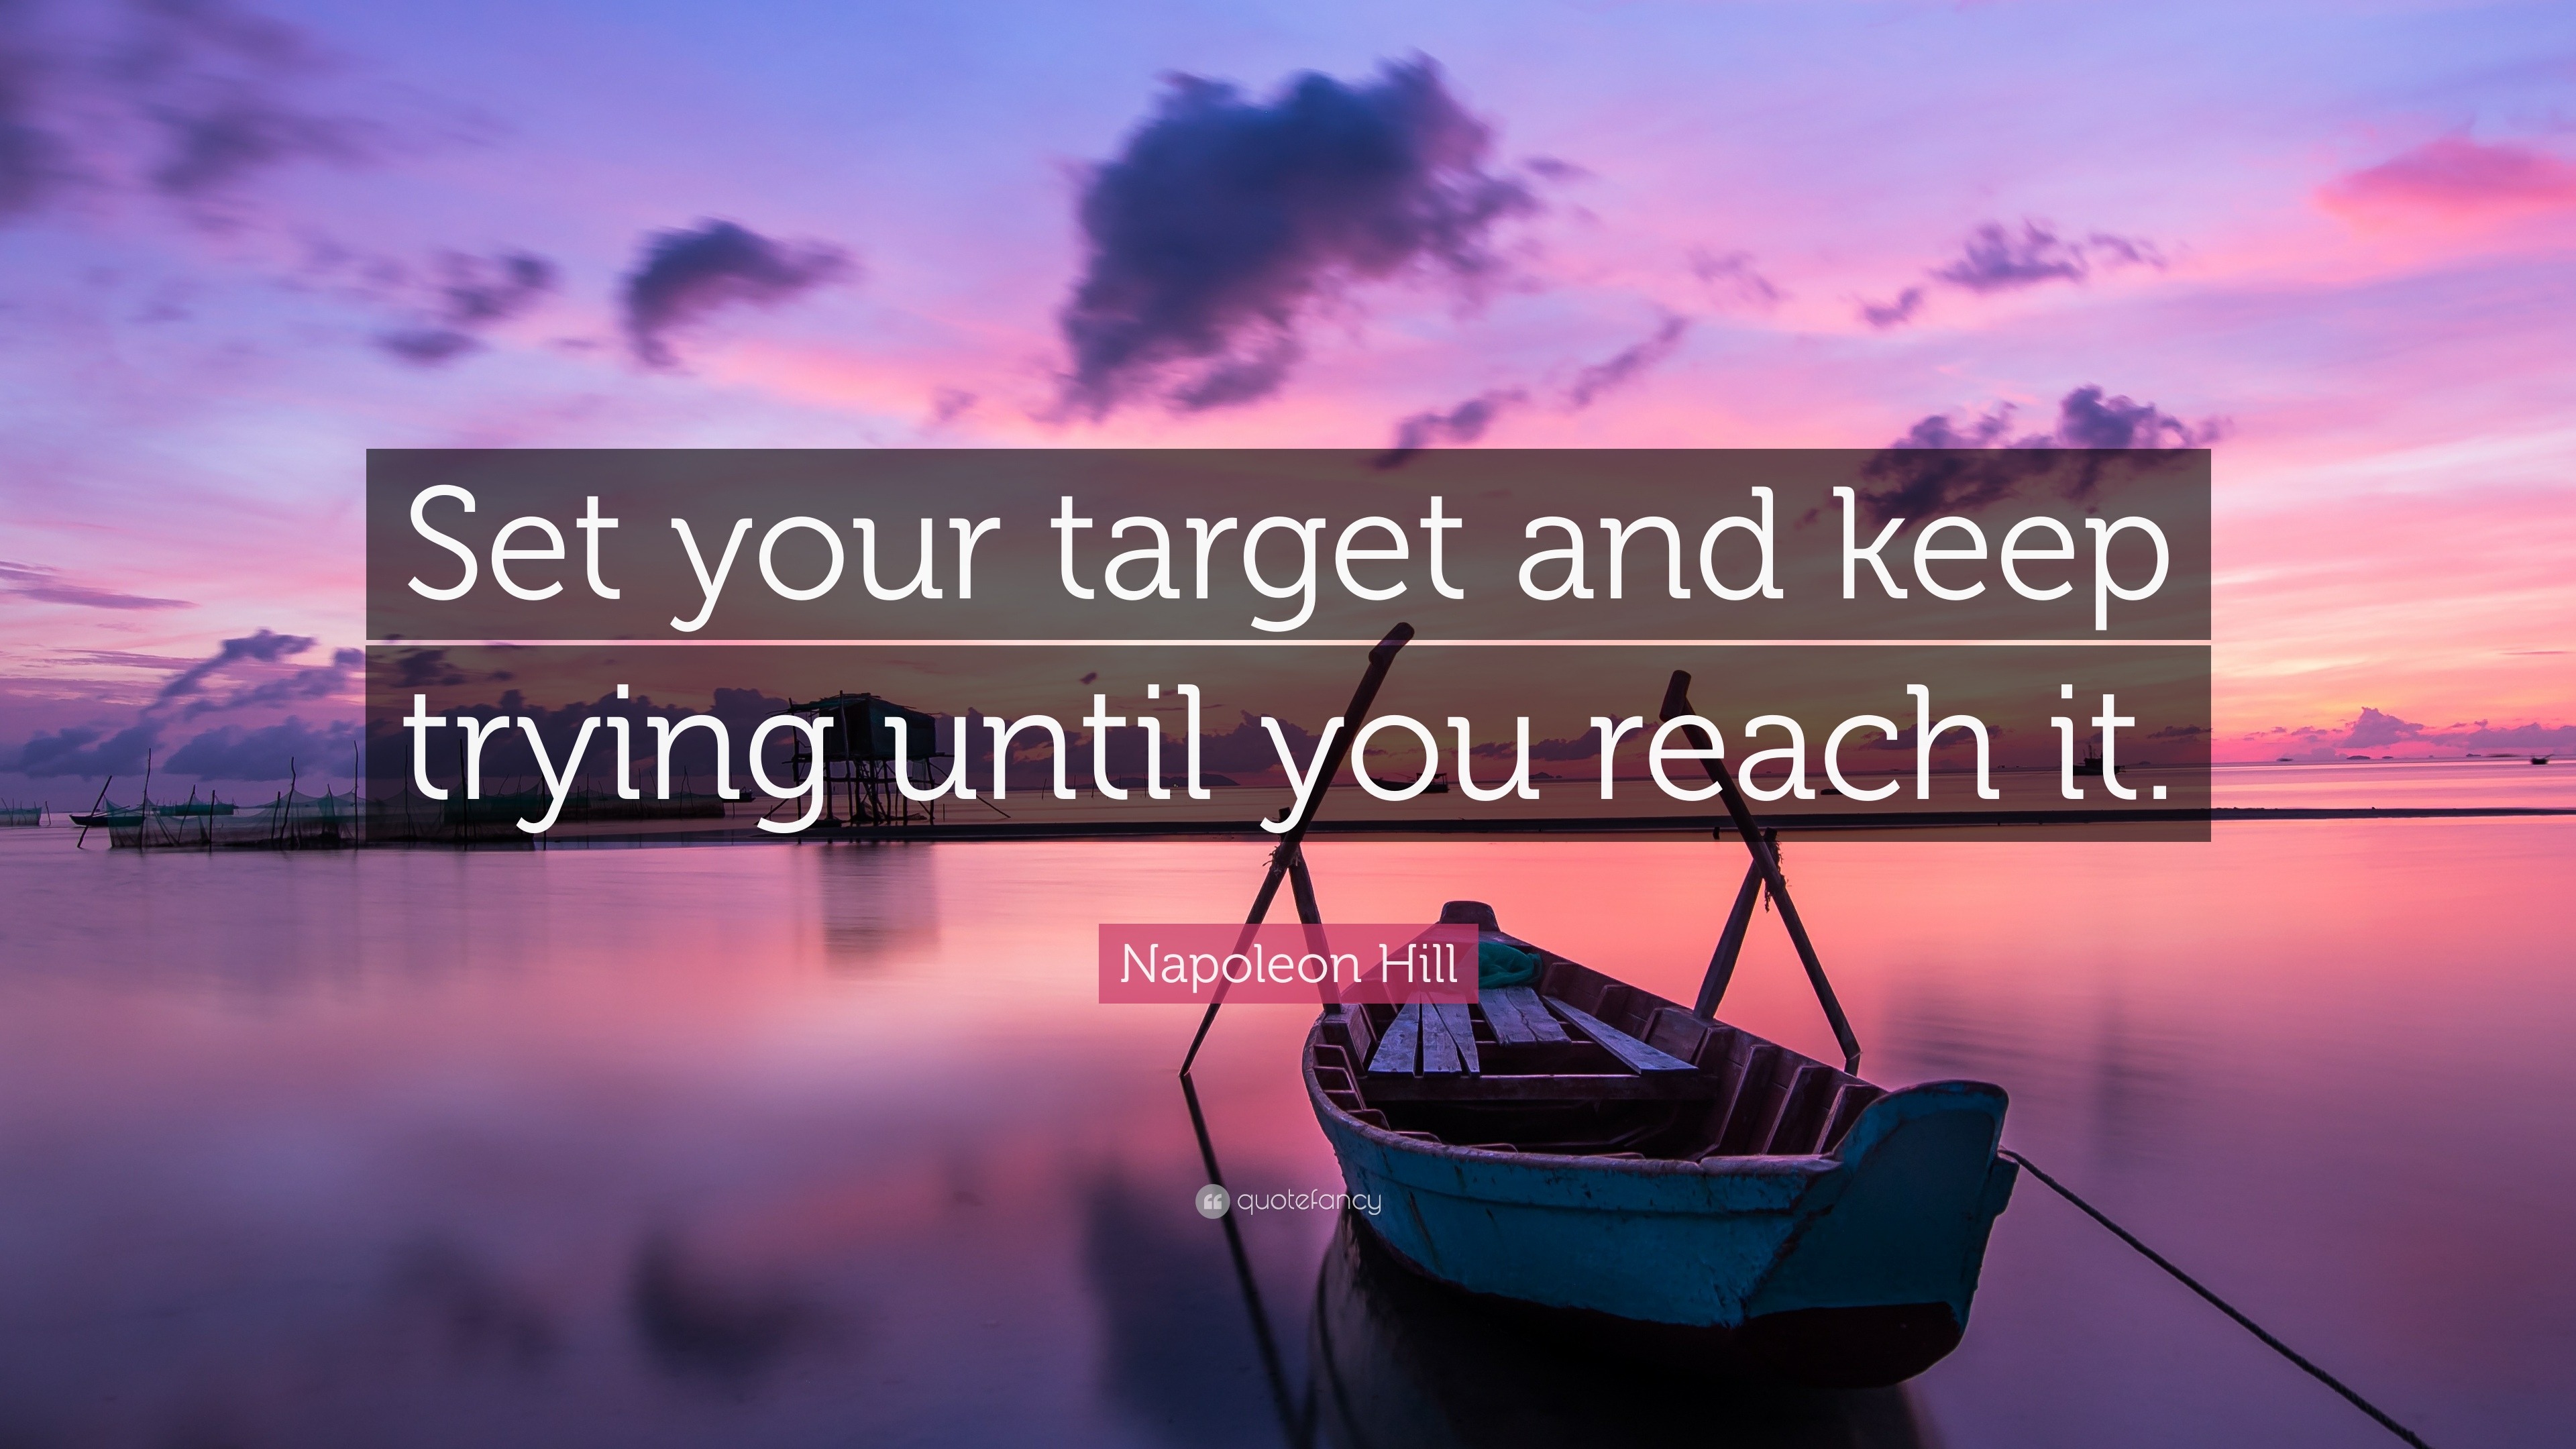 Napoleon Hill Quote “Set your target and keep trying